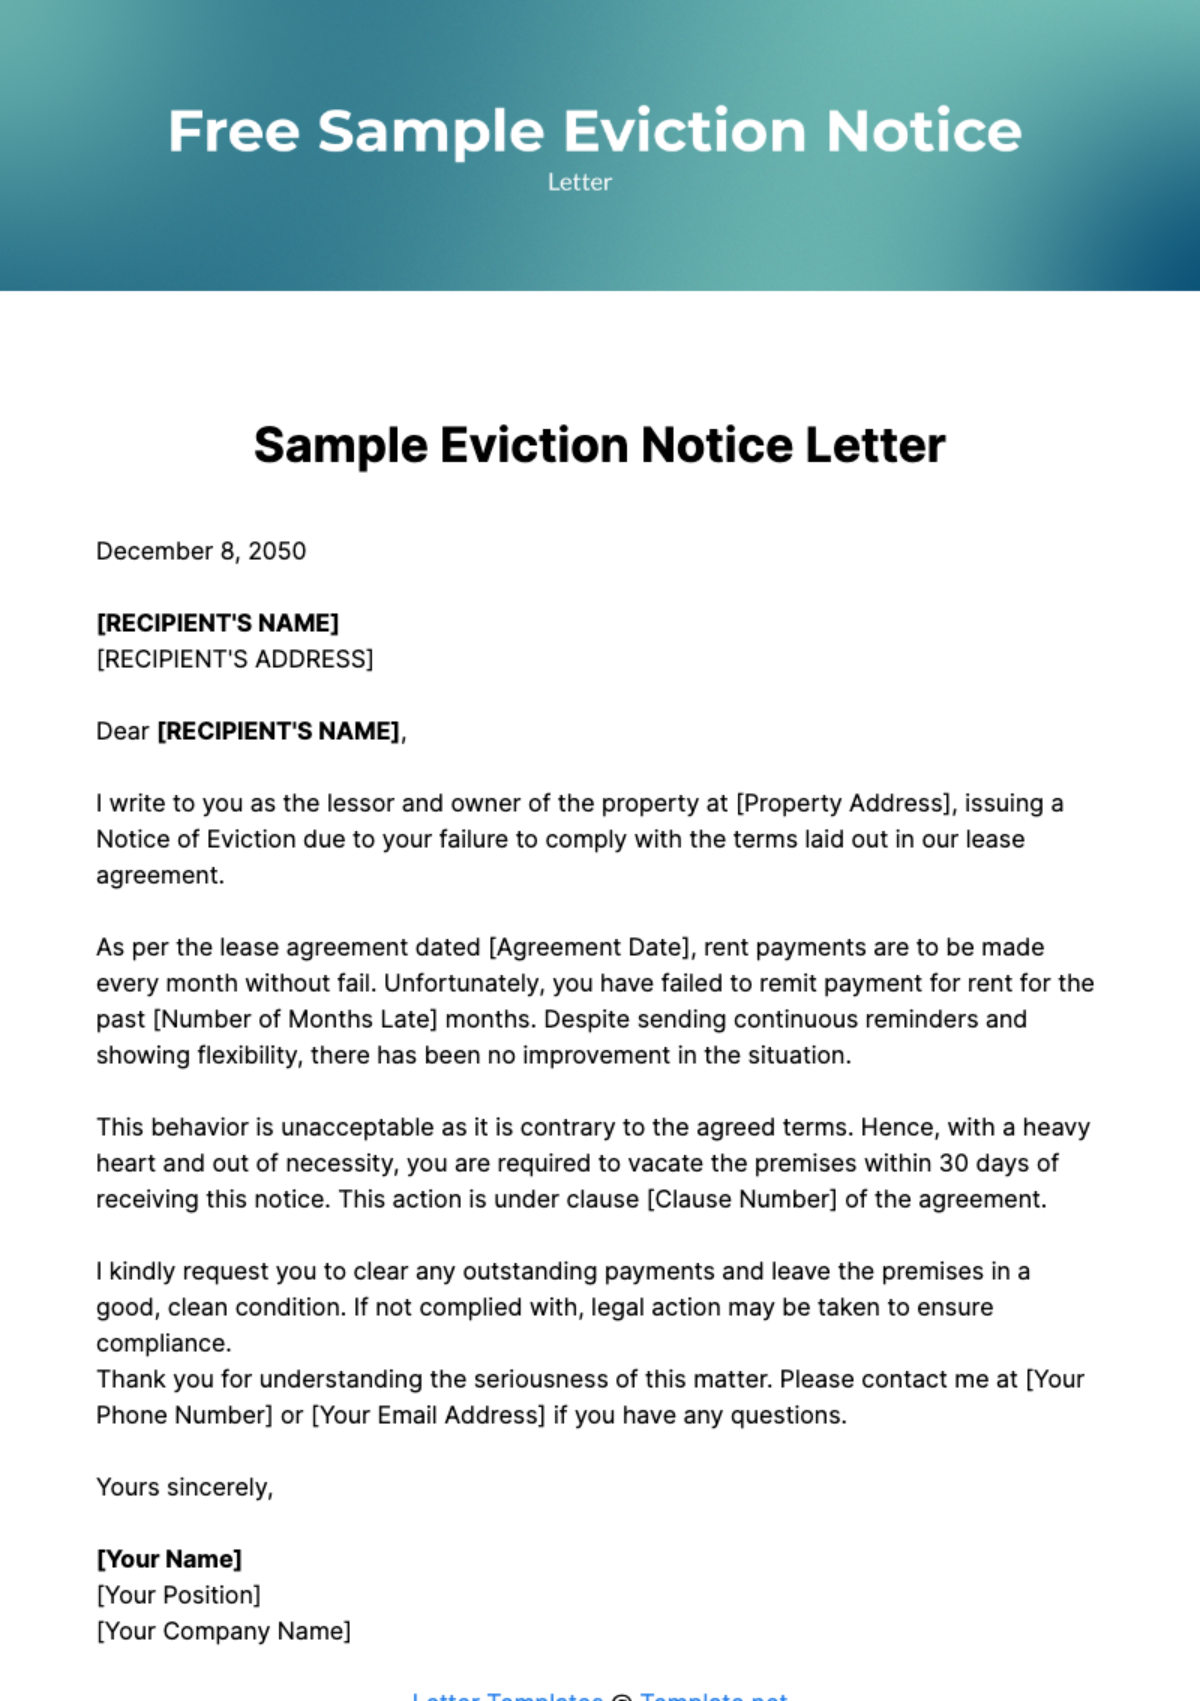 Free Sample Eviction Notice Letter Template